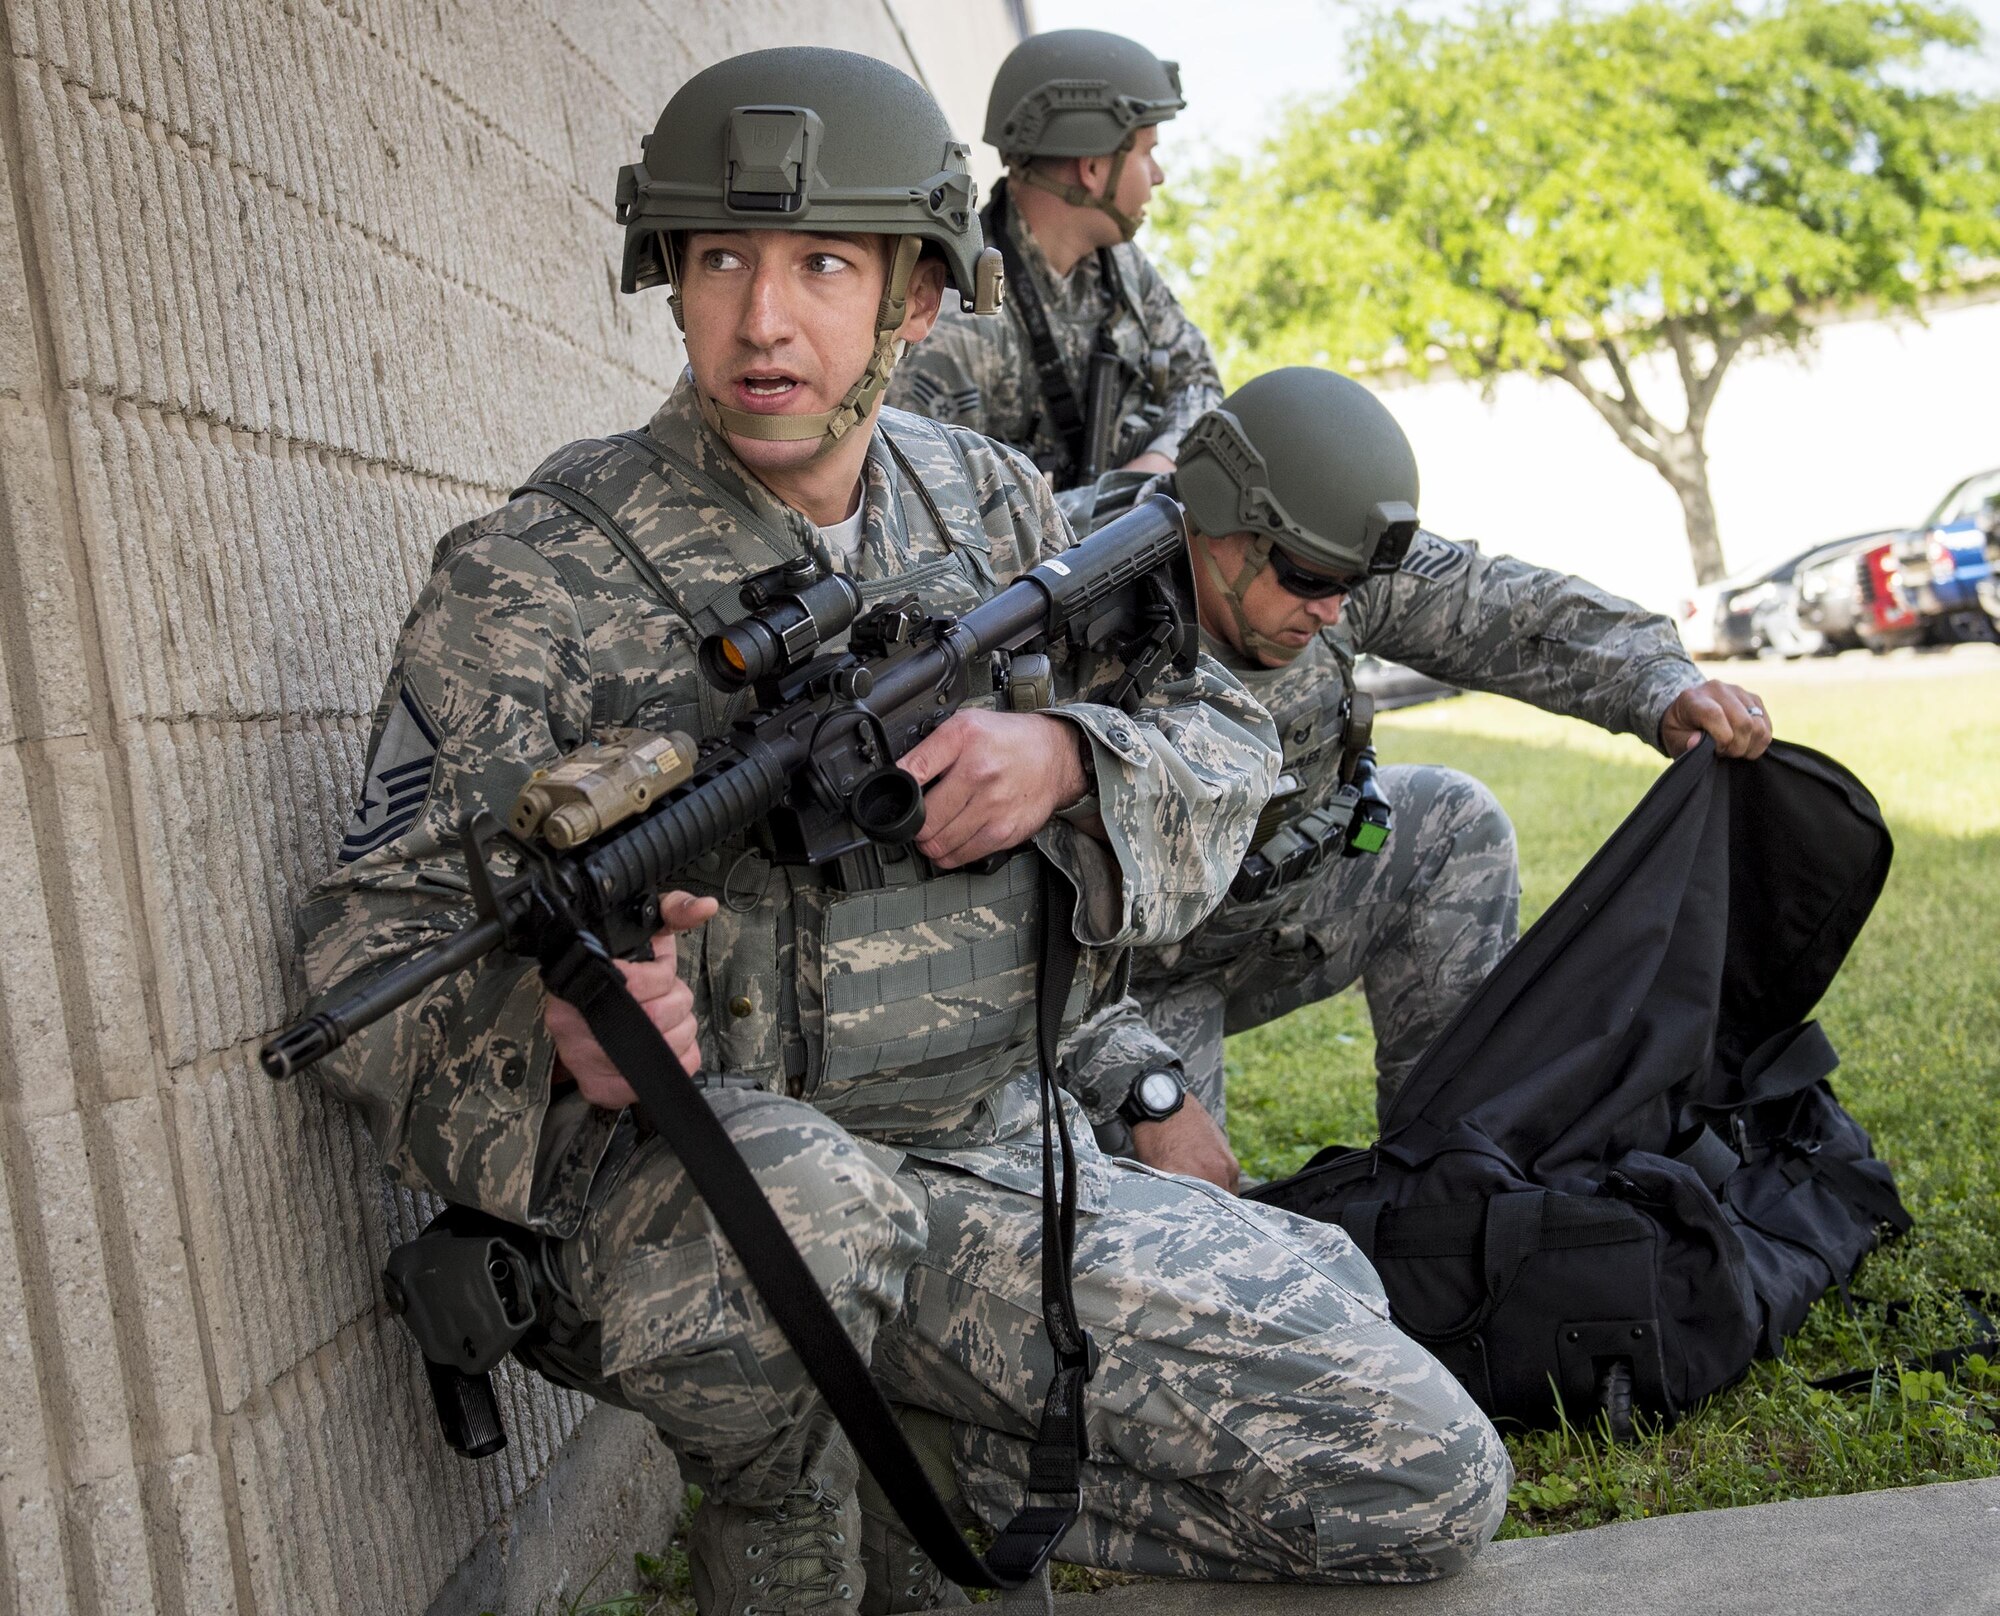 Master Sgt. Shane Zugai, 96th Security Forces Squadron, watches the building’s entrance during an active shooter exercise at Eglin Air Force Base, Fla., April 11.  The goal of the exercise was to evaluate people’s knowledge and response at the active shooter location and select lockdown locations.  (U.S. Air Force photo/Samuel King Jr.)